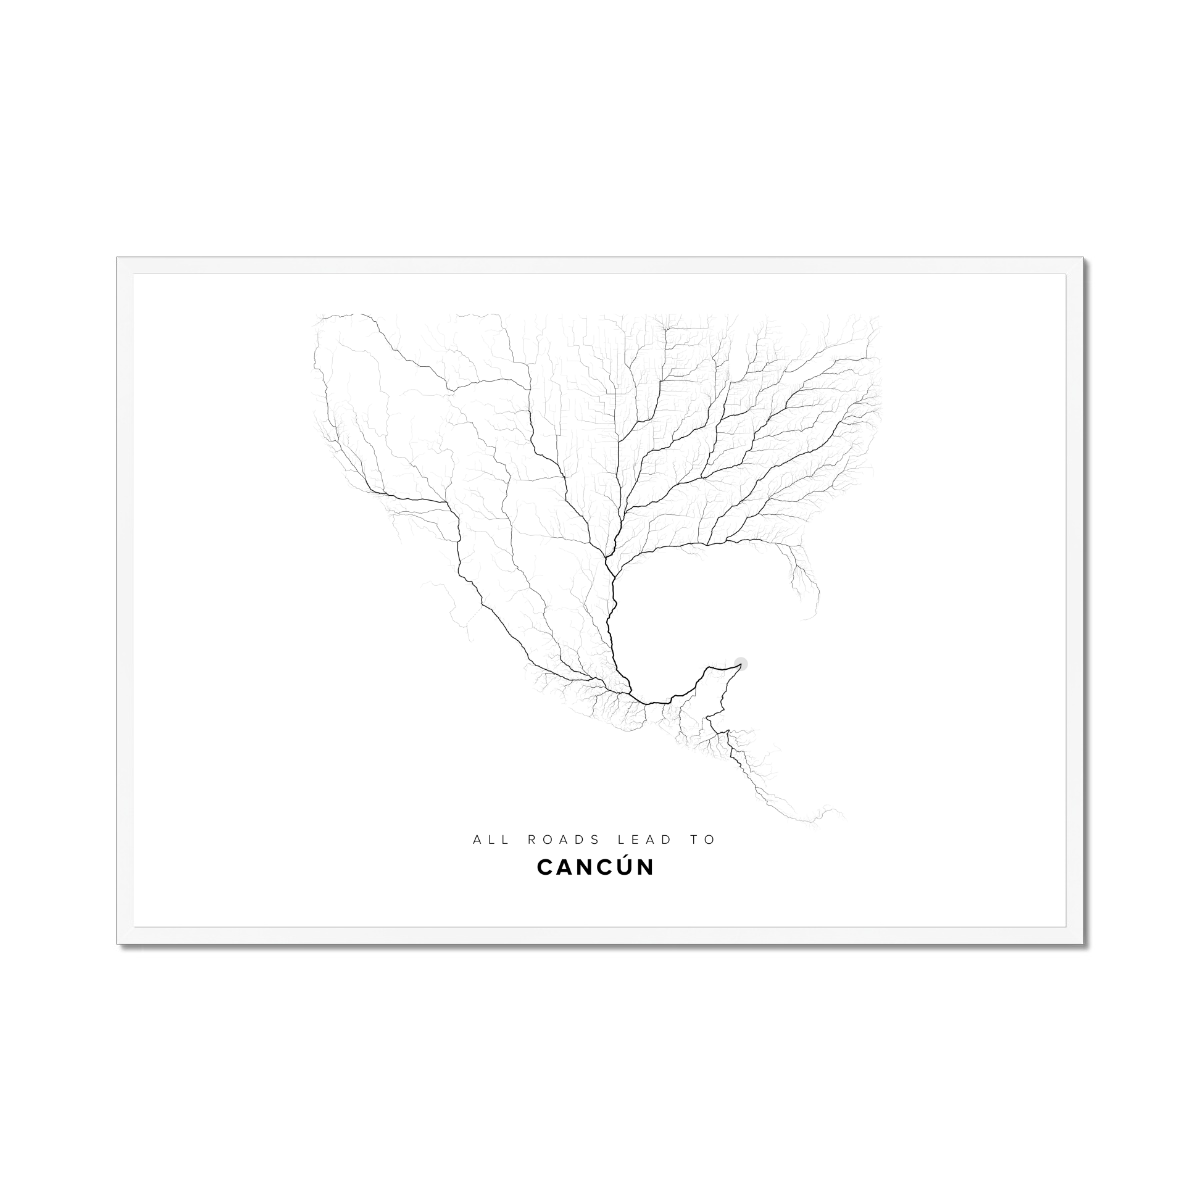 All roads lead to Cancún (Mexico) Fine Art Map Print